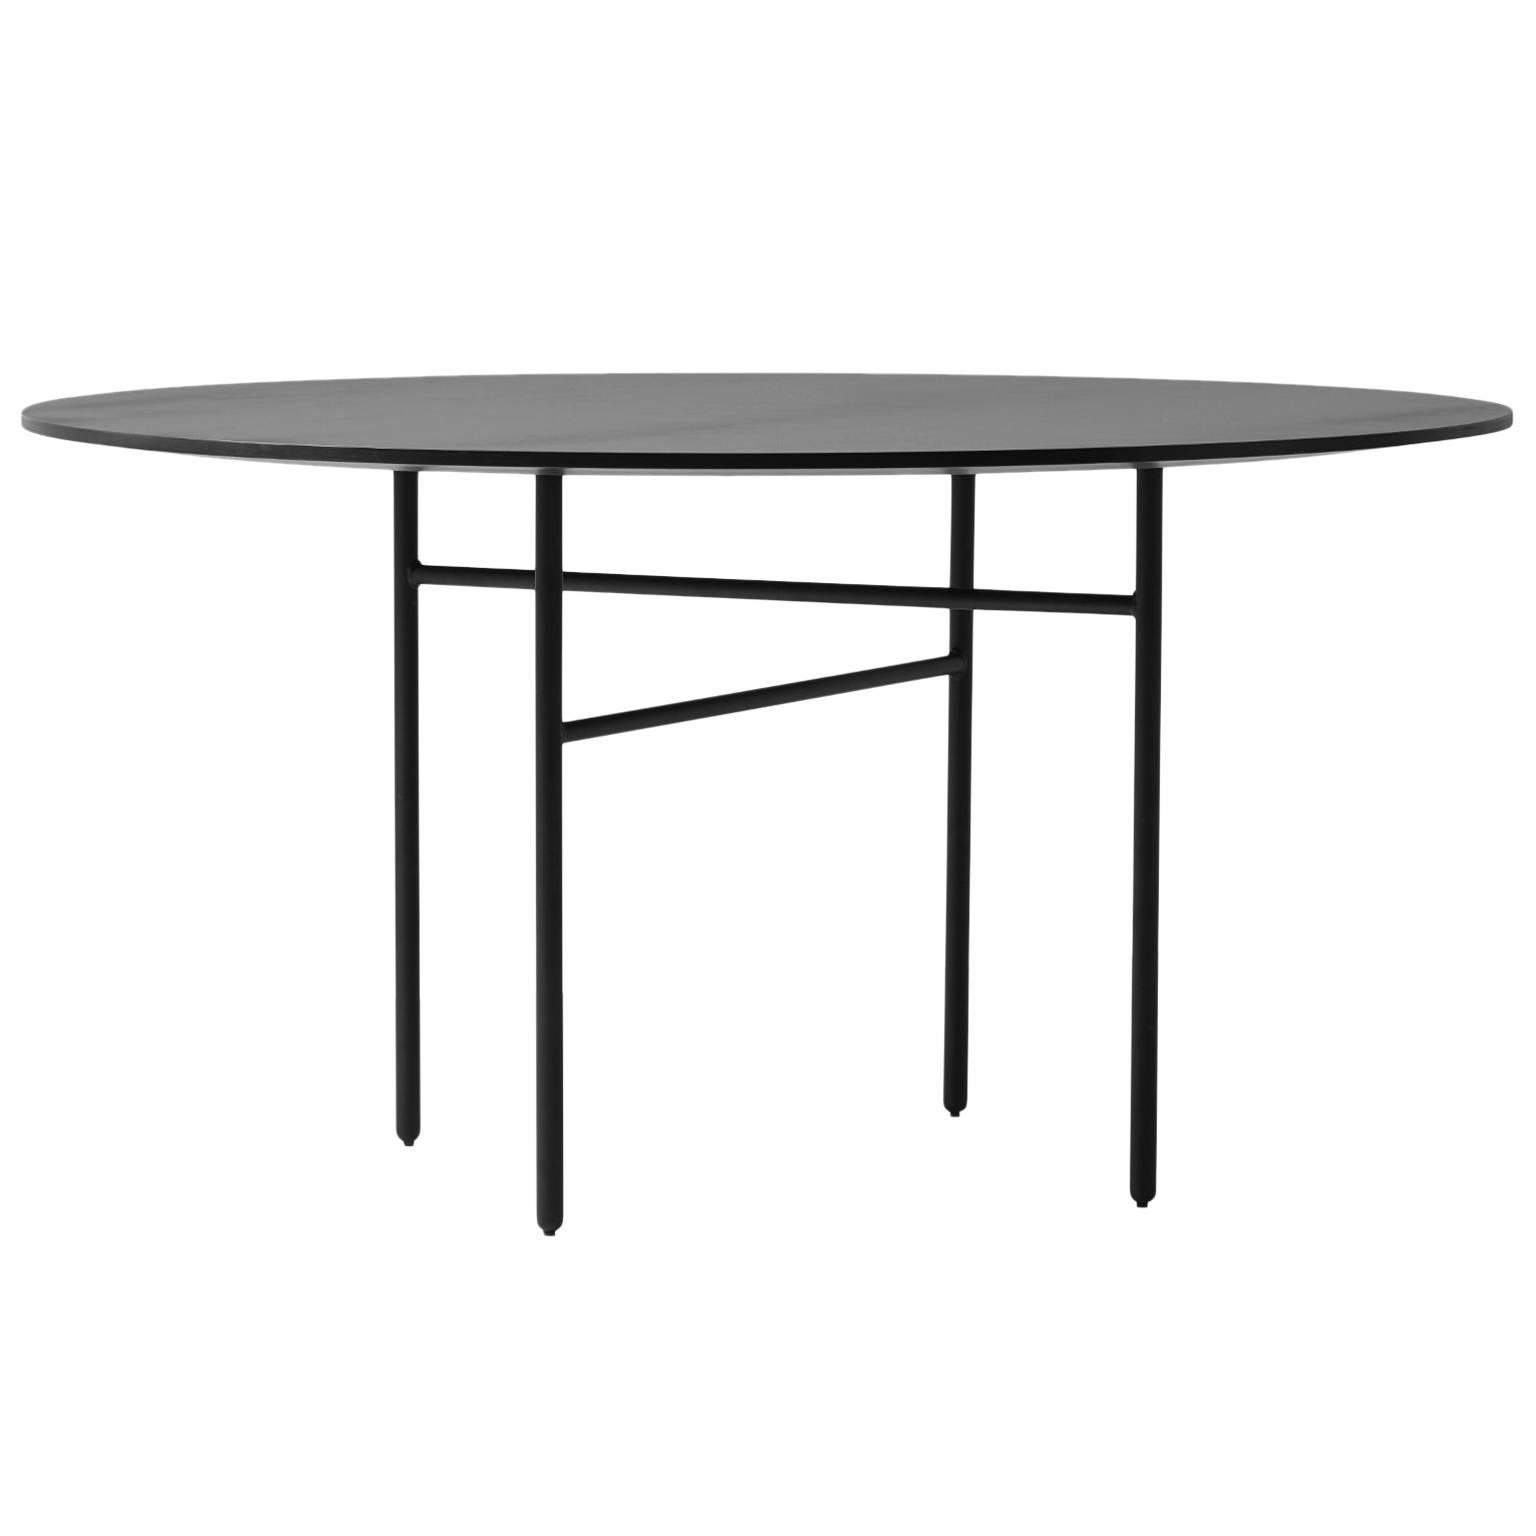 Round 54", Snaregade Table by Norm Architects, Black Veneer For Sale